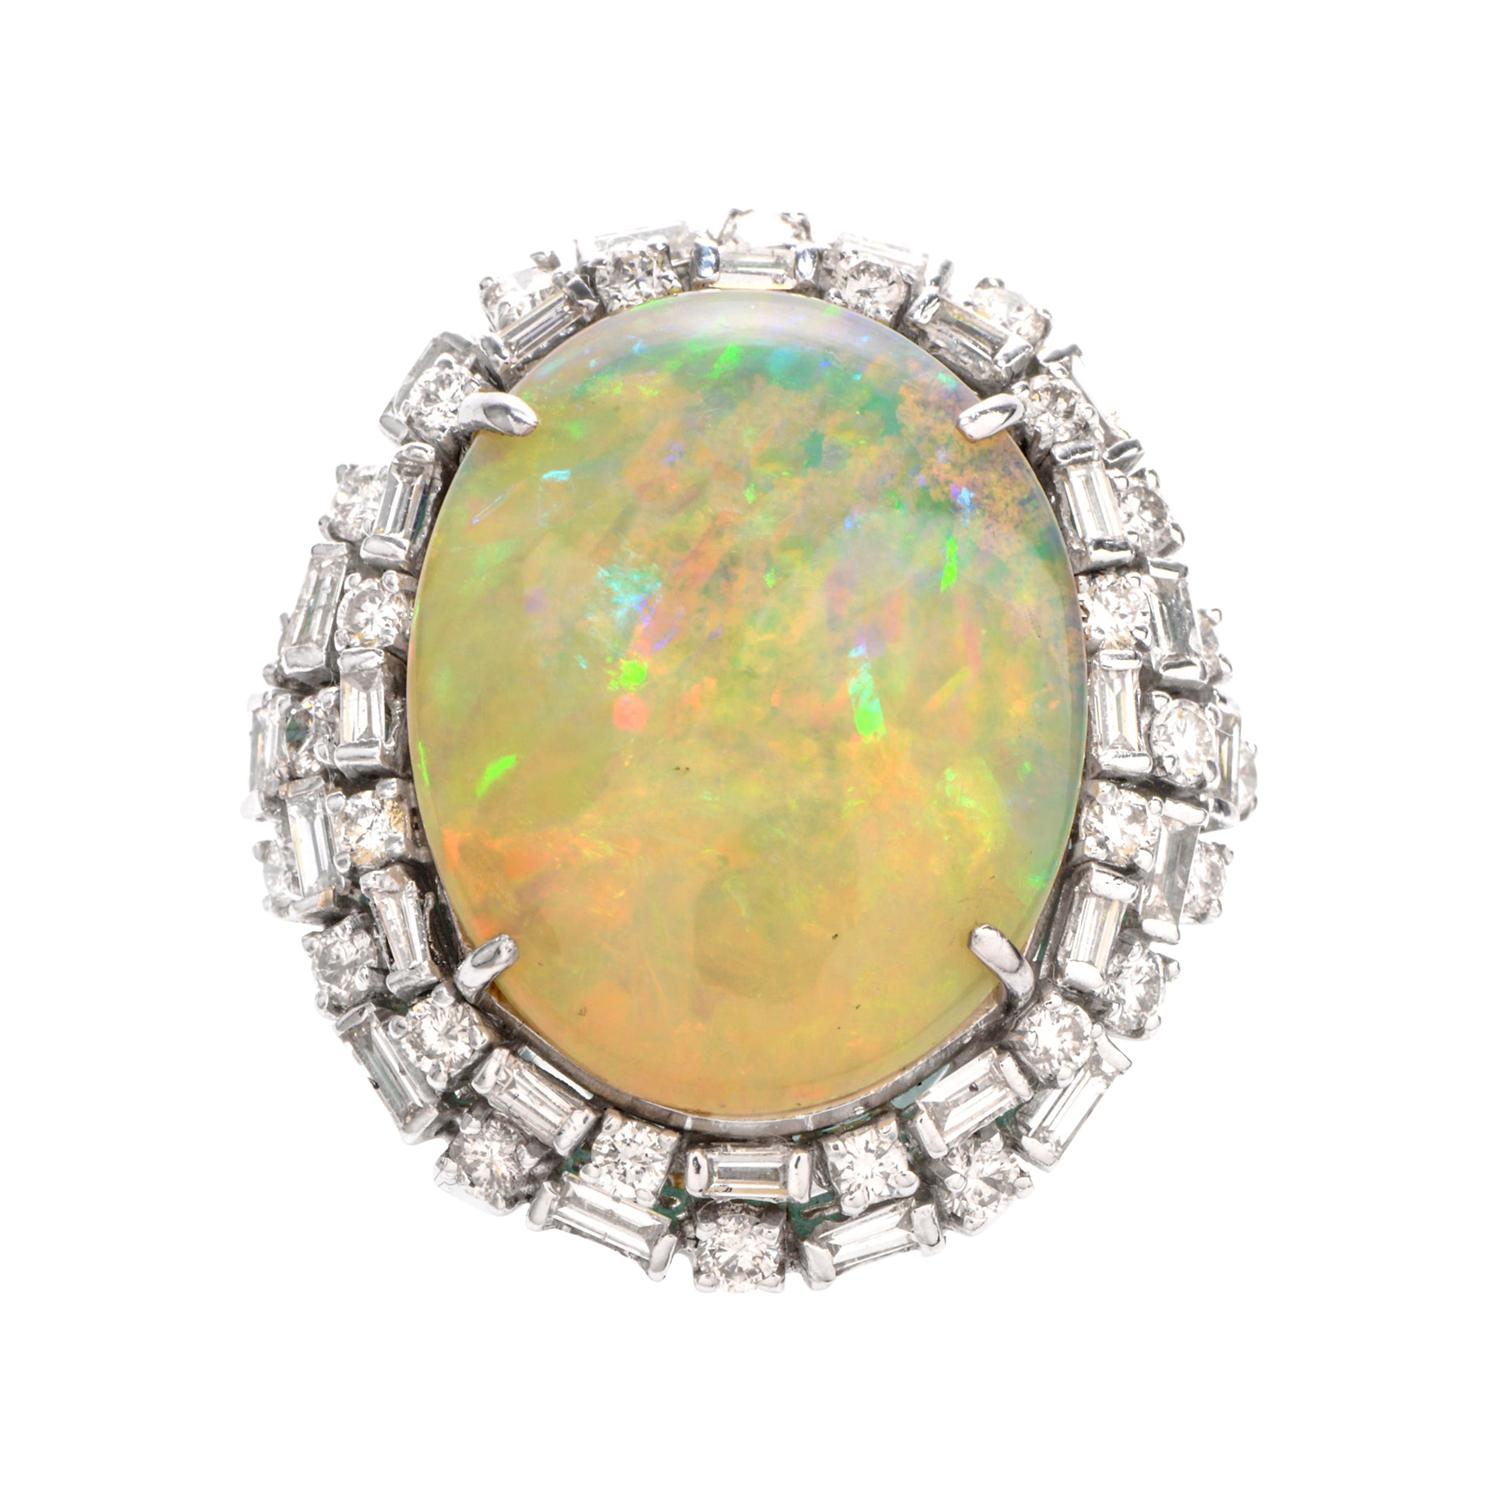 This eye-catching cocktail ring boasts color with a large oval-shaped

fiery Opal offering bursts of red, green, and blue.

With the Opal measuring appx. 21.90mm x 17.36mm x 8.63 mm and weighing

appx. 18.81 carats, this piece is surrounded by a